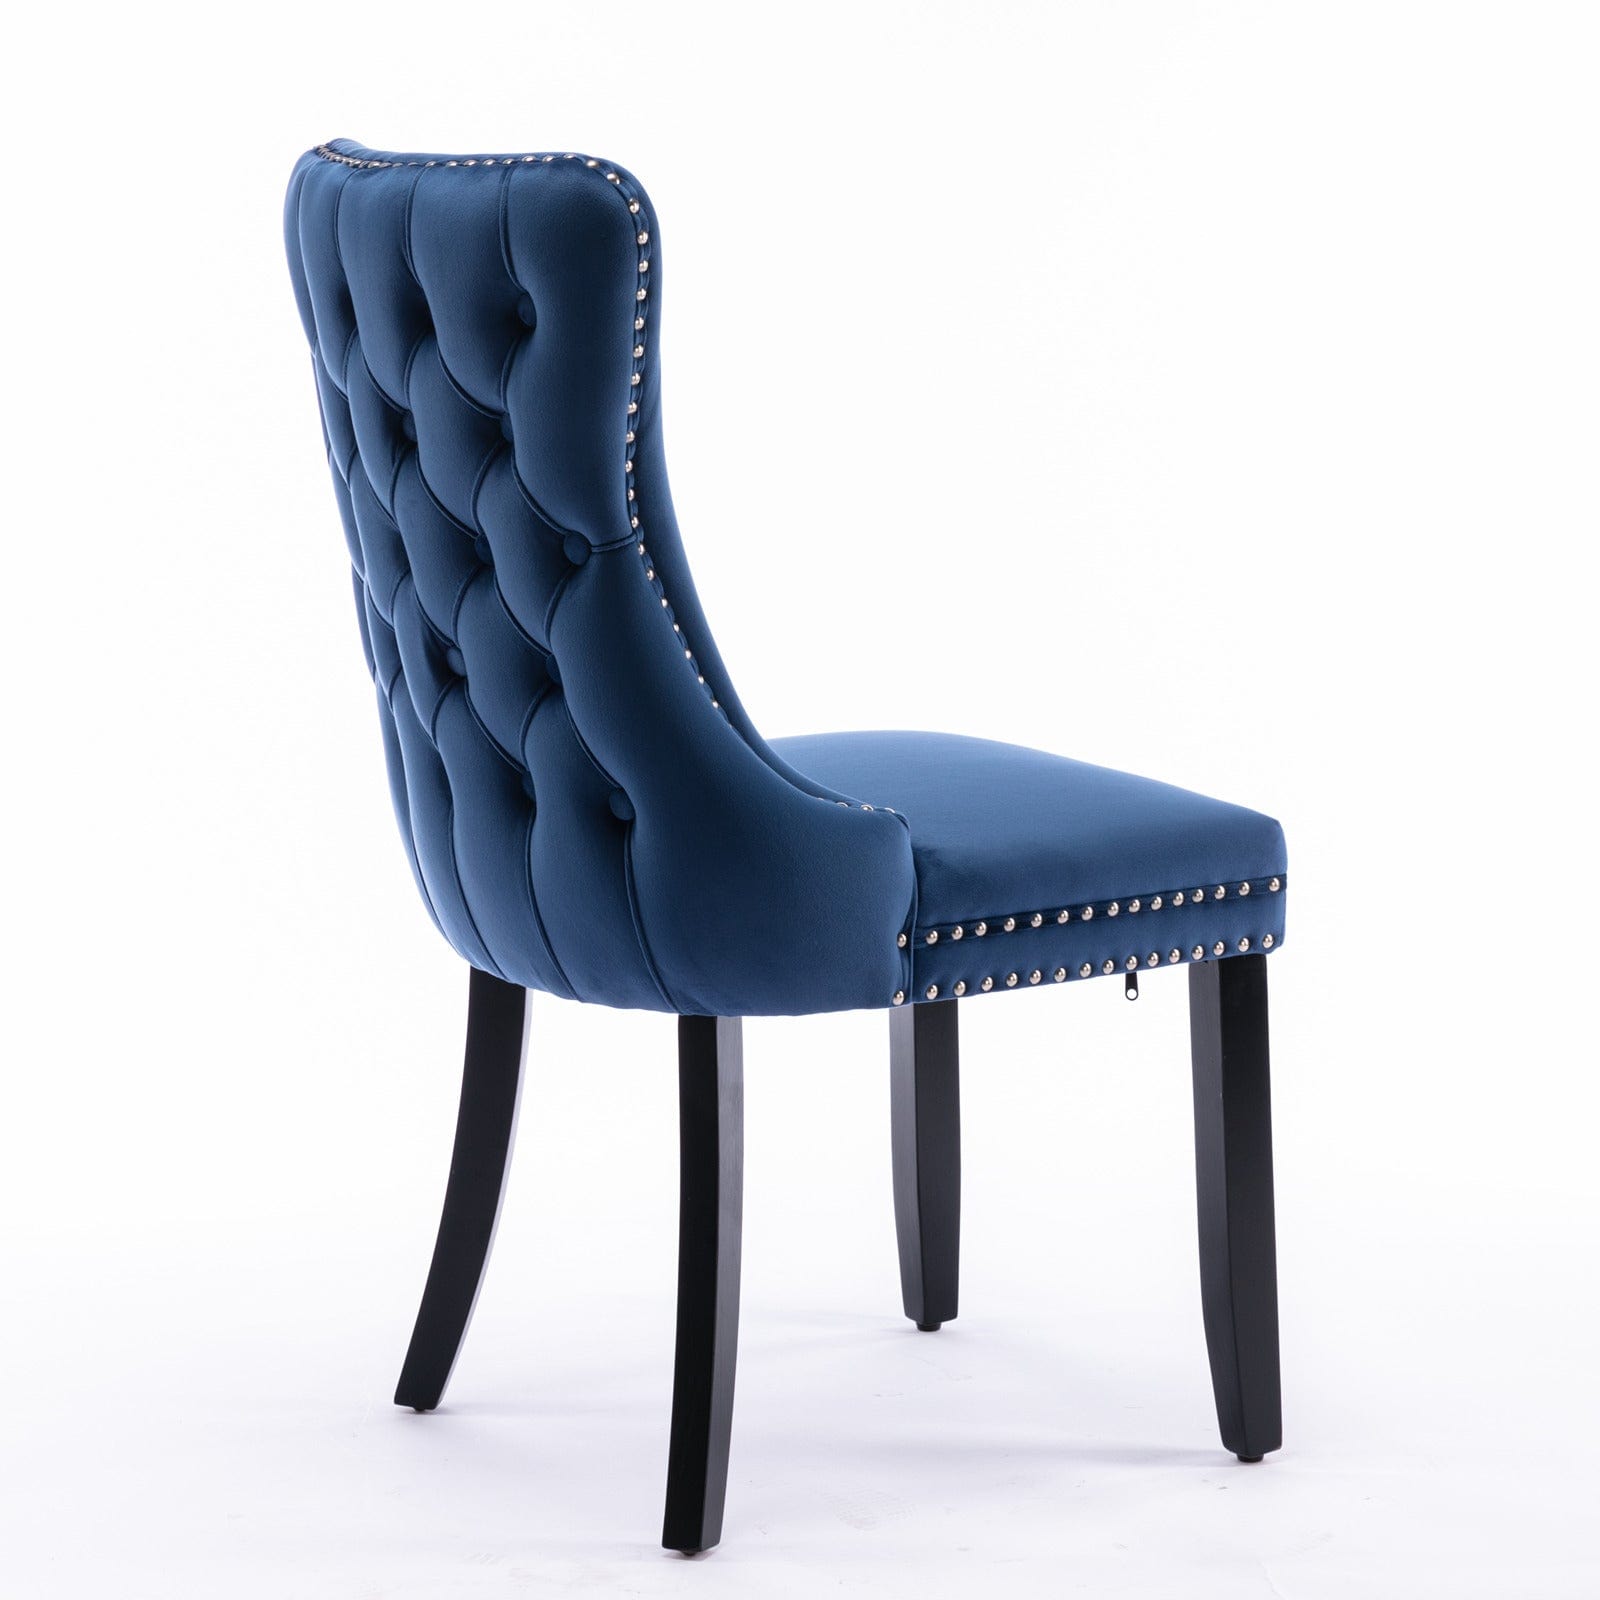 1st Choice Furniture Direct Dining chair 1st Choice Modern Velvet Dining Chair in Blue Finish (Set of 2)